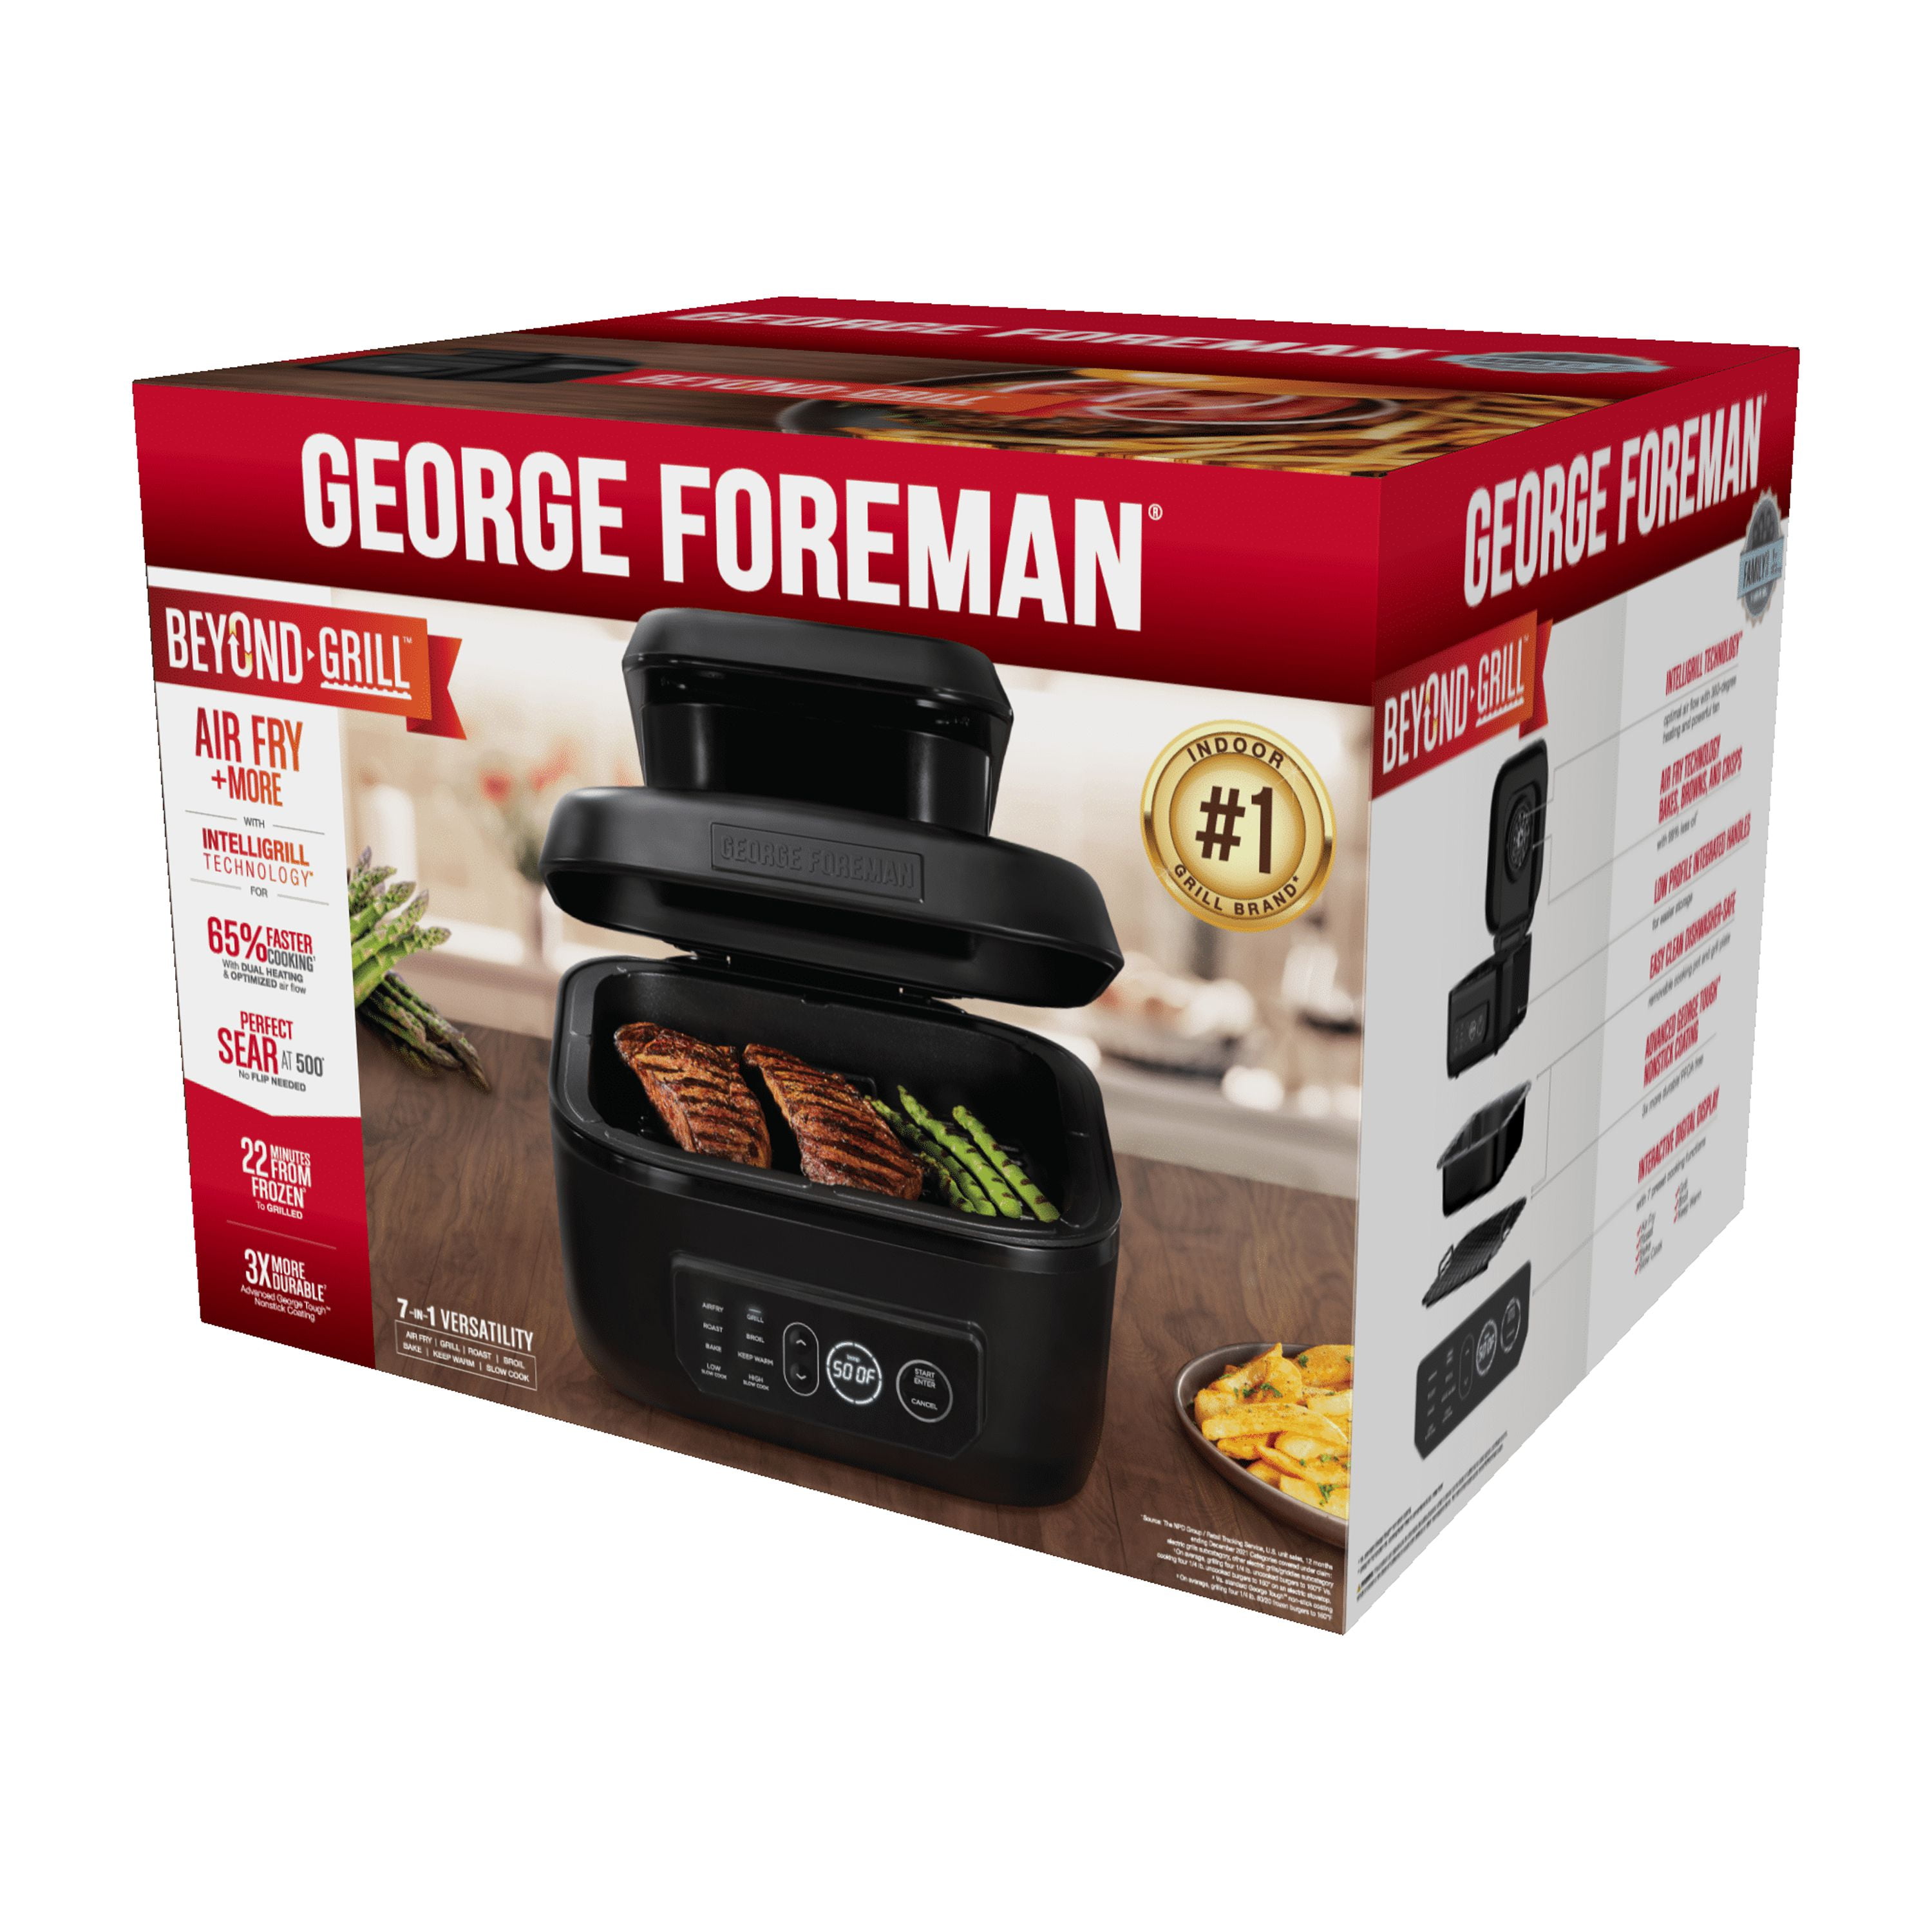 George Foreman Beyond Grill 8-In-1 Electric Indoor Grill With Air Fry  Technology – MCAFD900D 1 ct